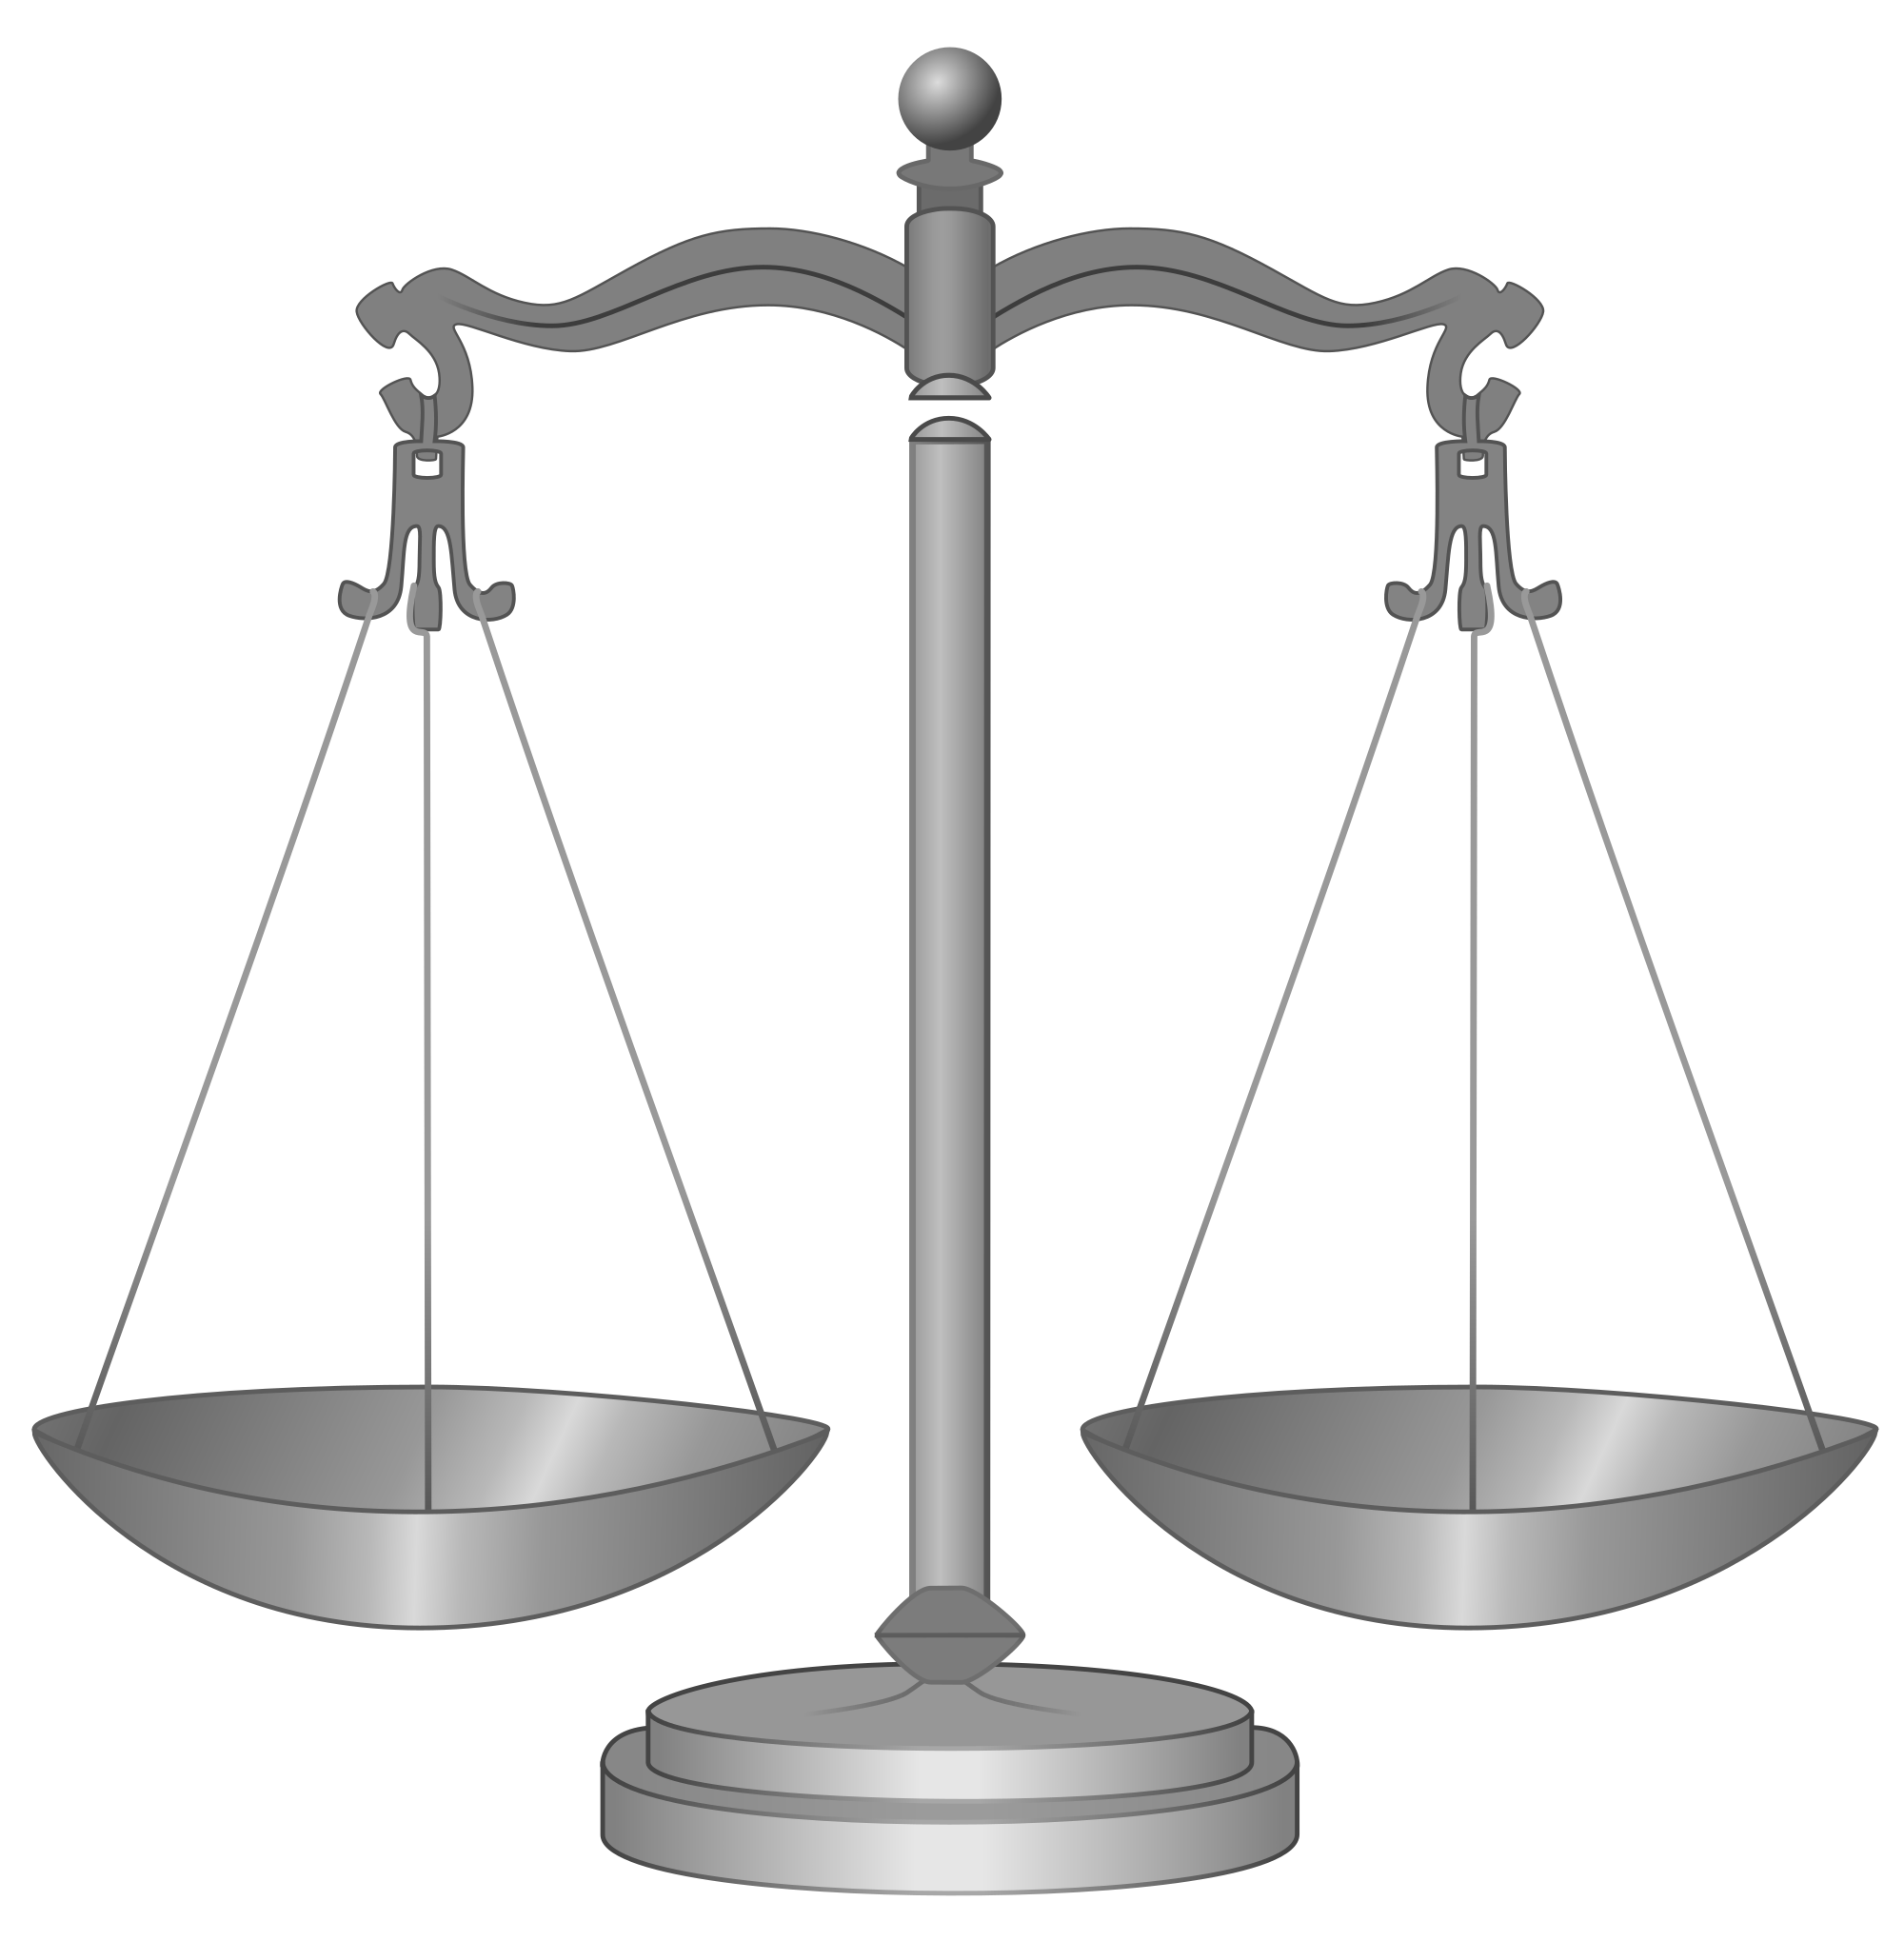 2000px-Scale_of_justice_2.svg.png